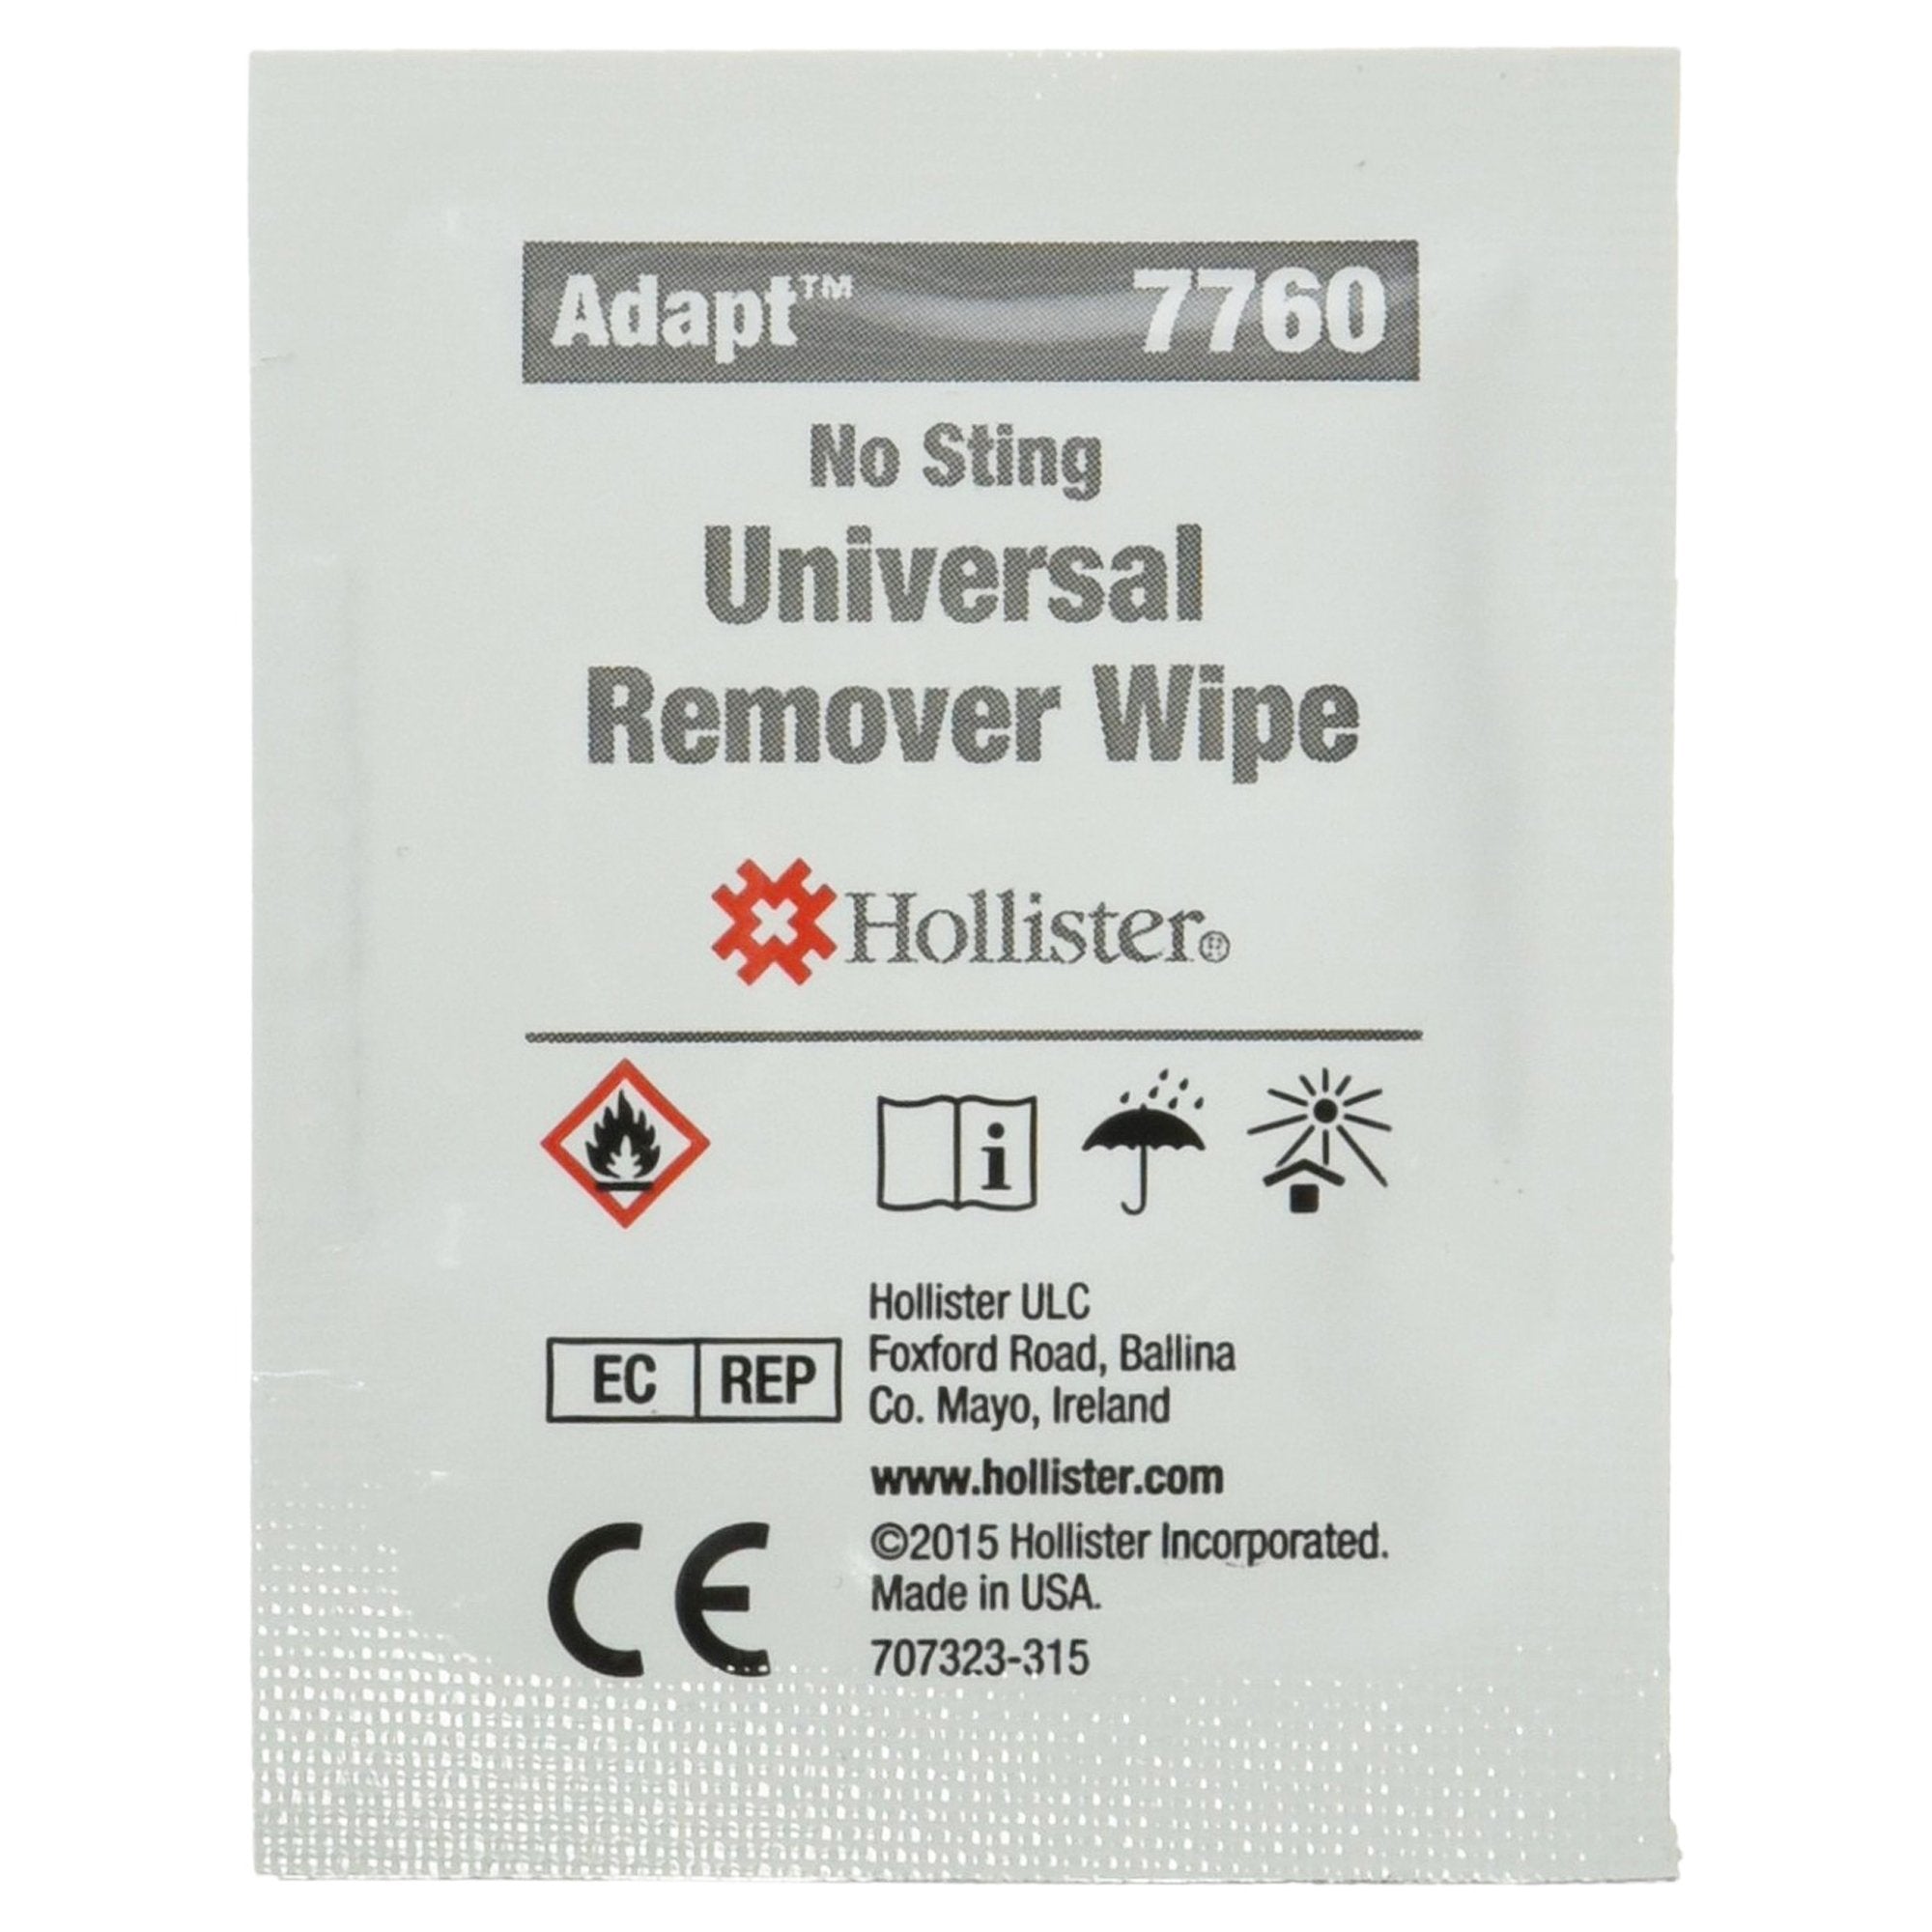 Adhesive and Barrier Remover Adapt Wipe 50 per Box